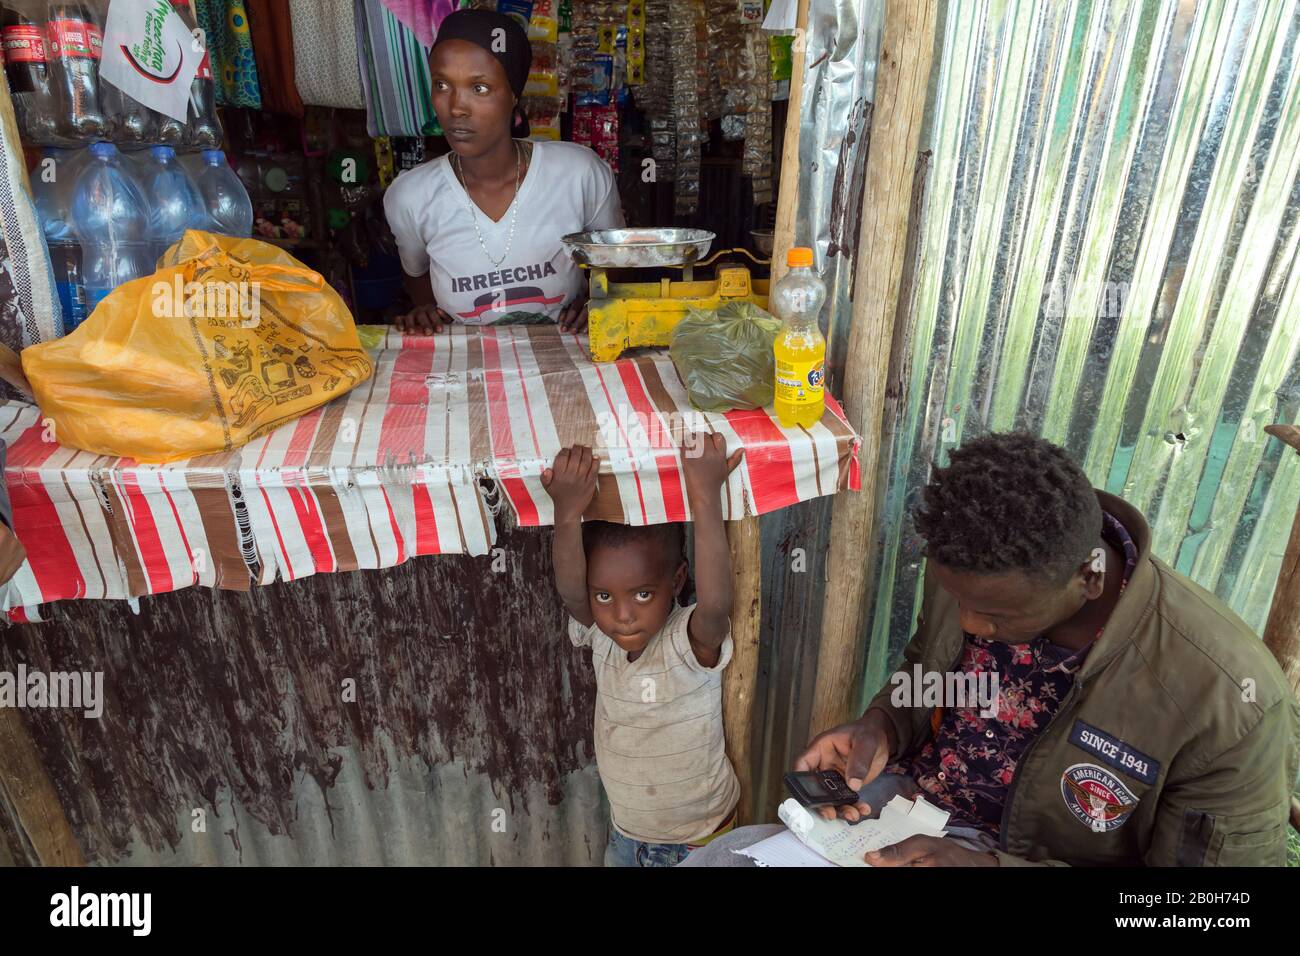 02.11.2019, Bishoftu, Oromiyaa, Ethiopia - A shop owner from the Somali region (IDP) is supported by the Women and Migration-Prone Youth Economic Empo Stock Photo